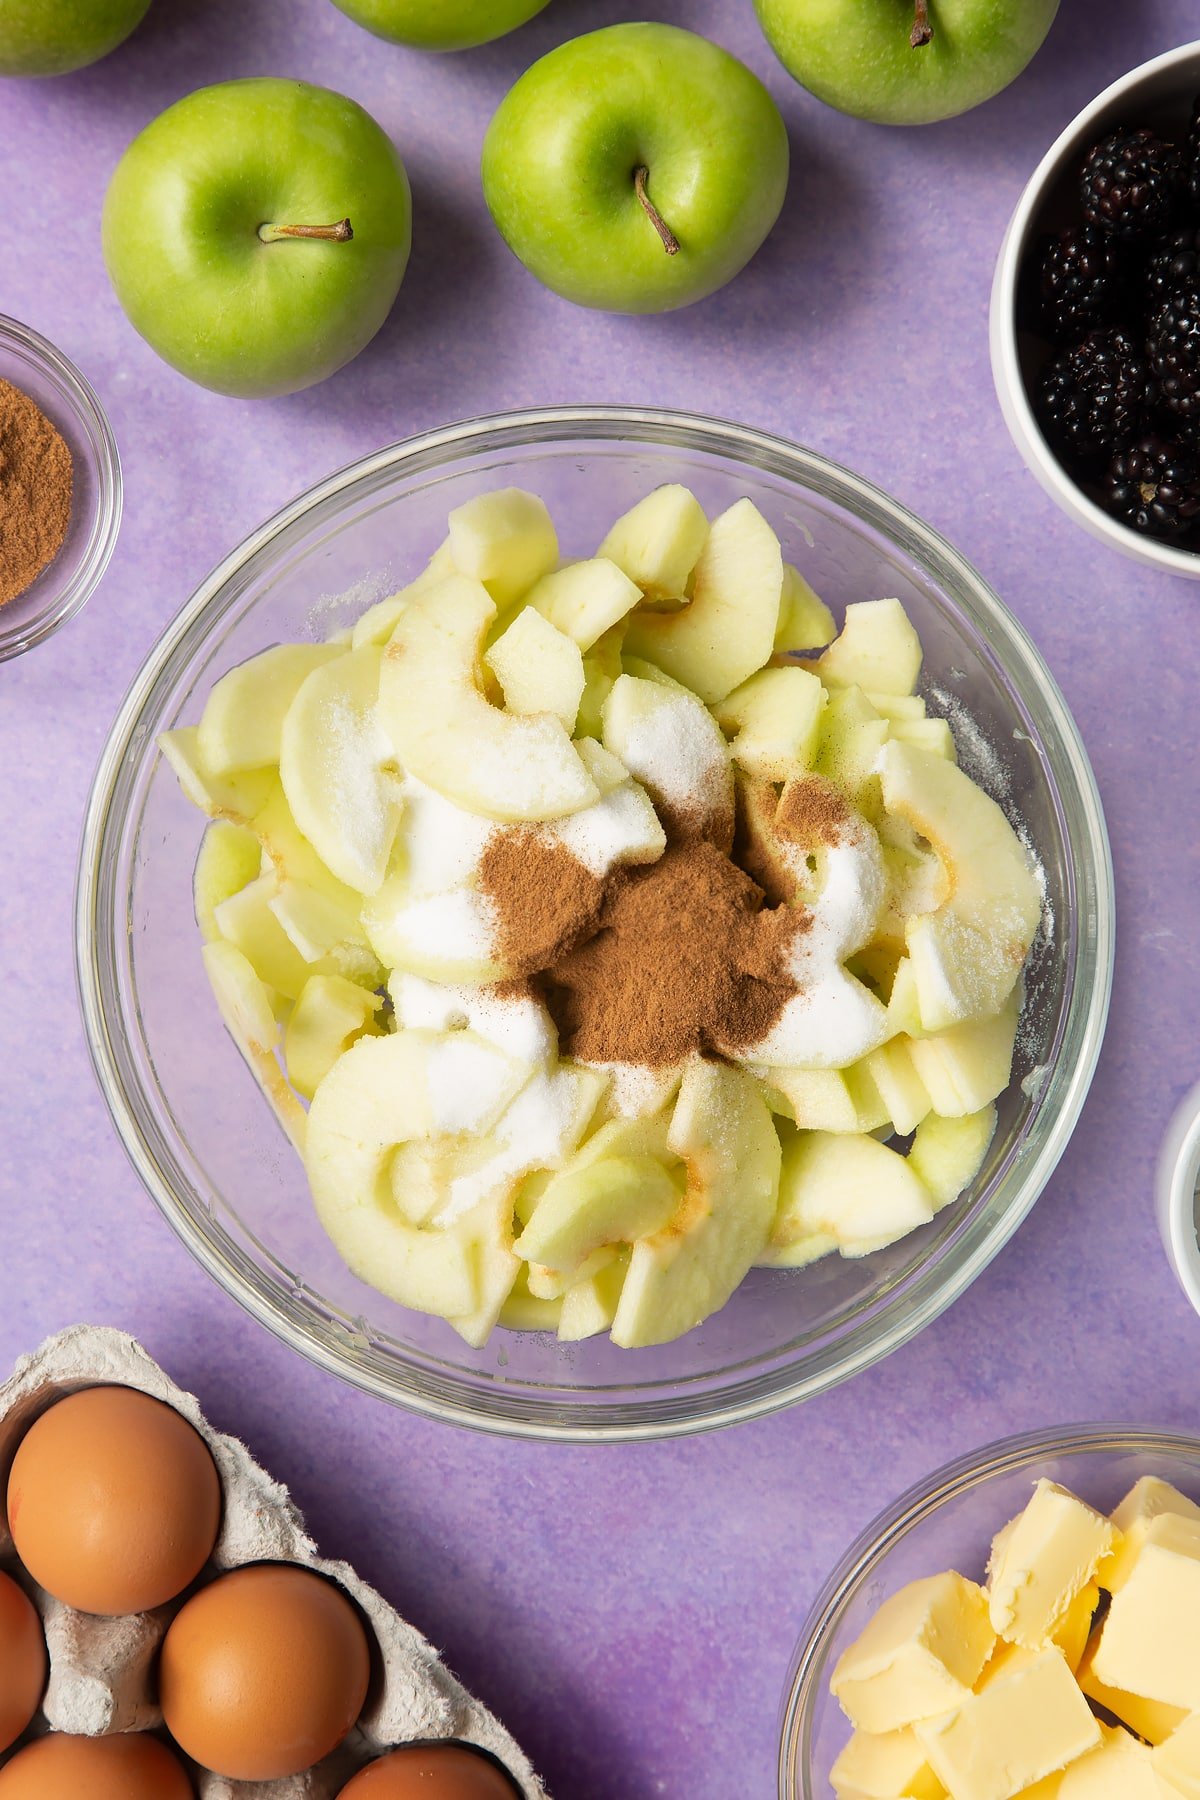 Apple slices in a glass mixing bowl with sugar and cinnamon. Ingredients to make apple and blackberry pie surround the bowl.